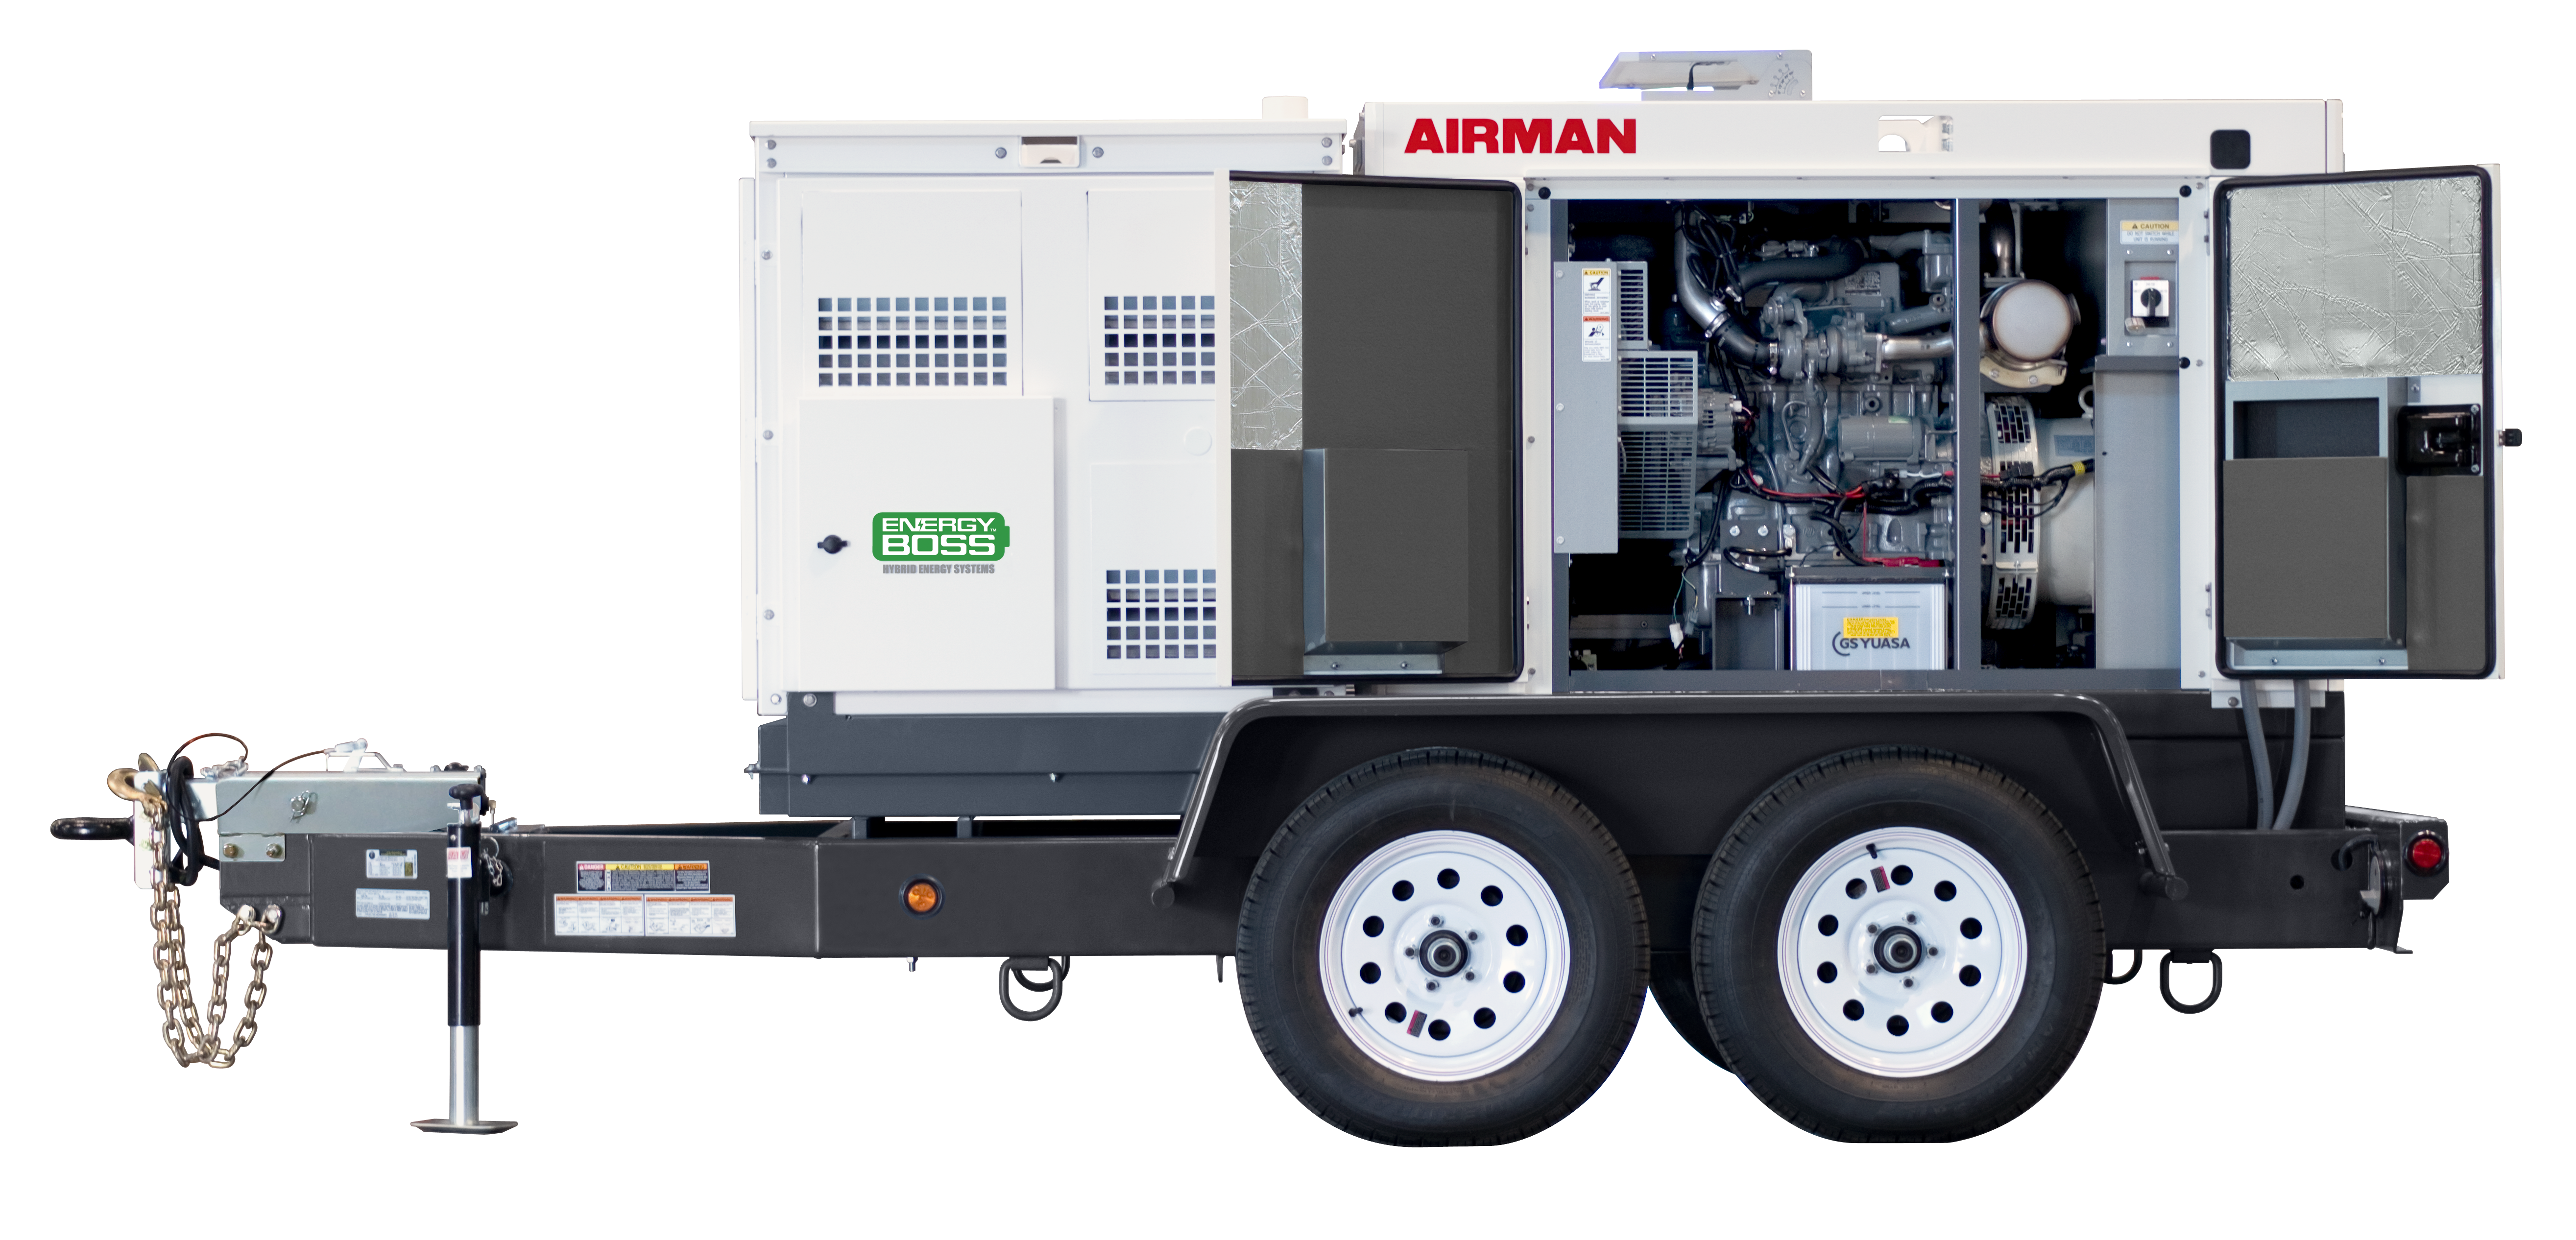 ith Energy Boss, going green has never been easier, thanks to its energy and fuel-efficient features. The hybrid energy system helps reduce fuel consumption, maintenance costs, and greenhouse gas emissions.